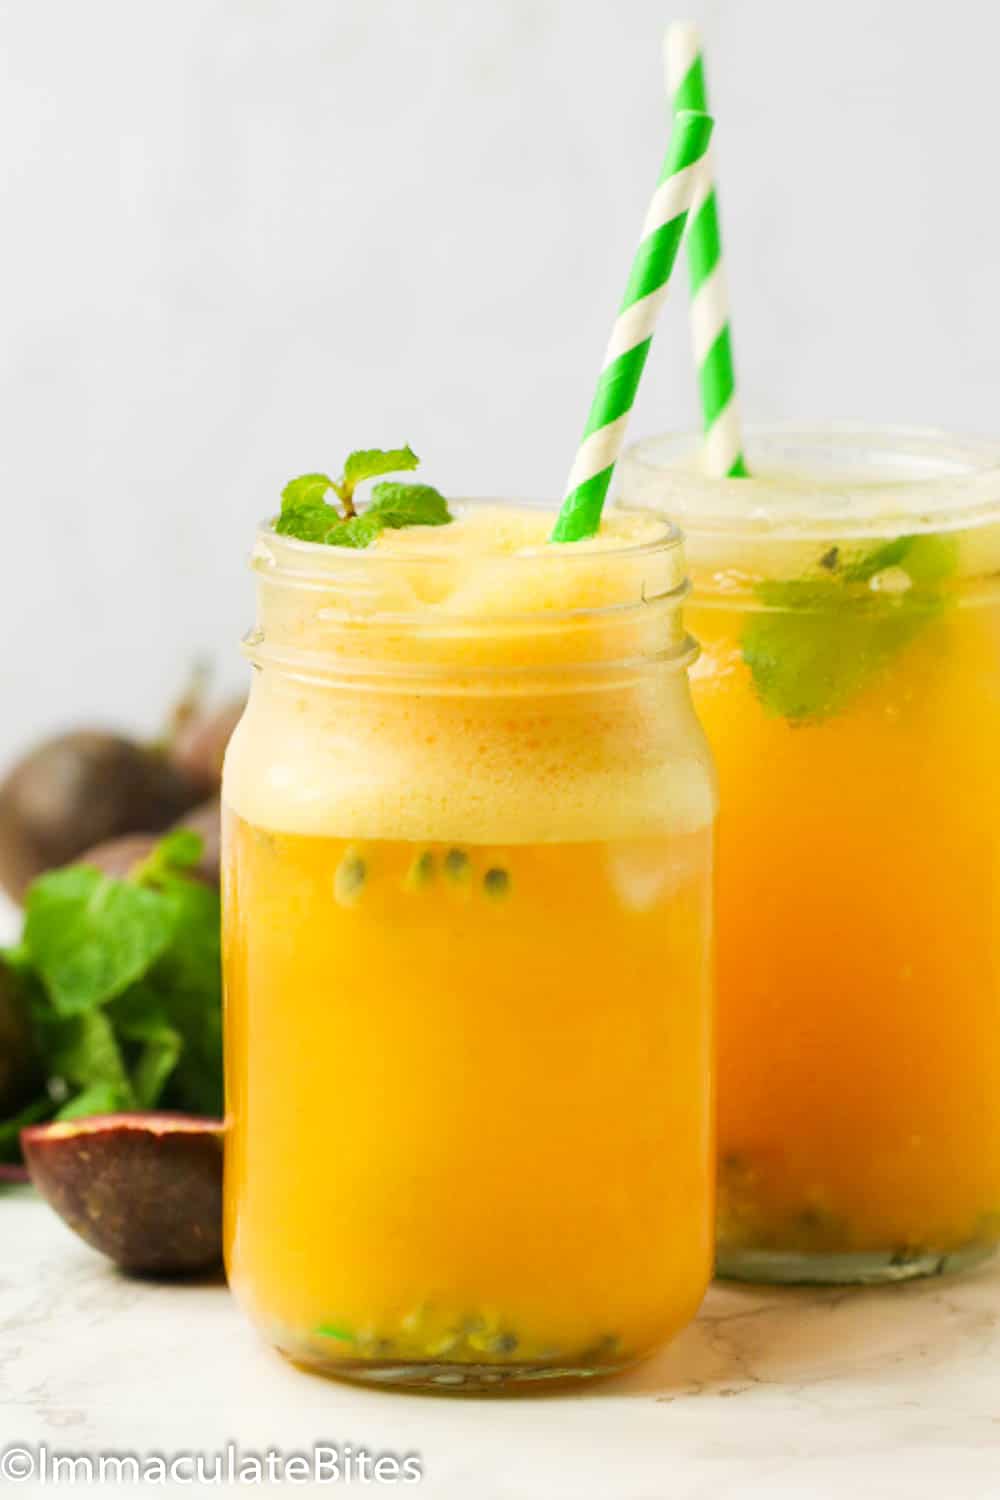 Two Glasses of Passion Fruit Juice